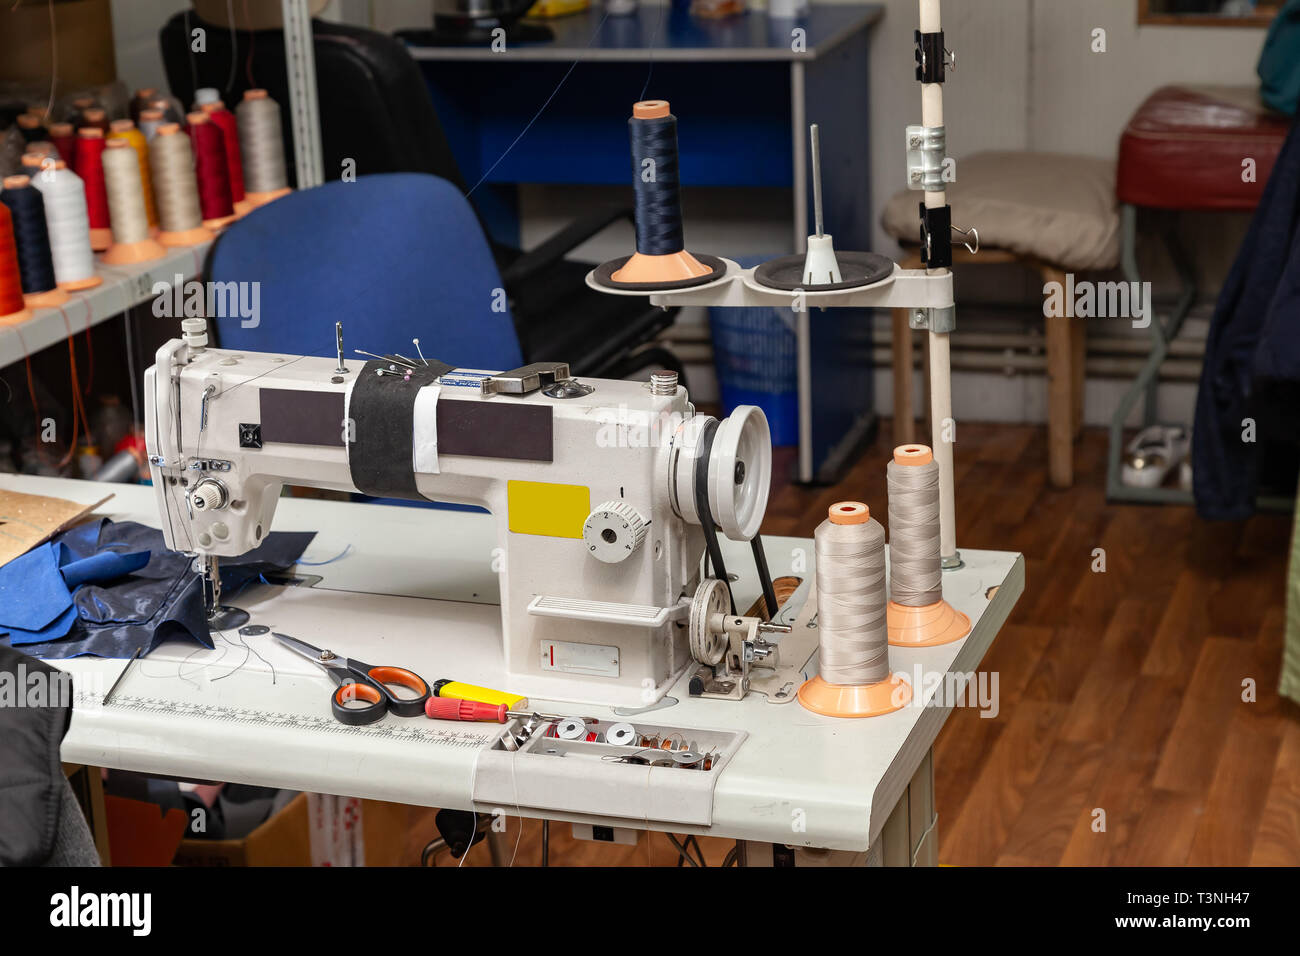 White electric industrial sewing machine in a workshop for sewing and working with fabrics. Stock Photo